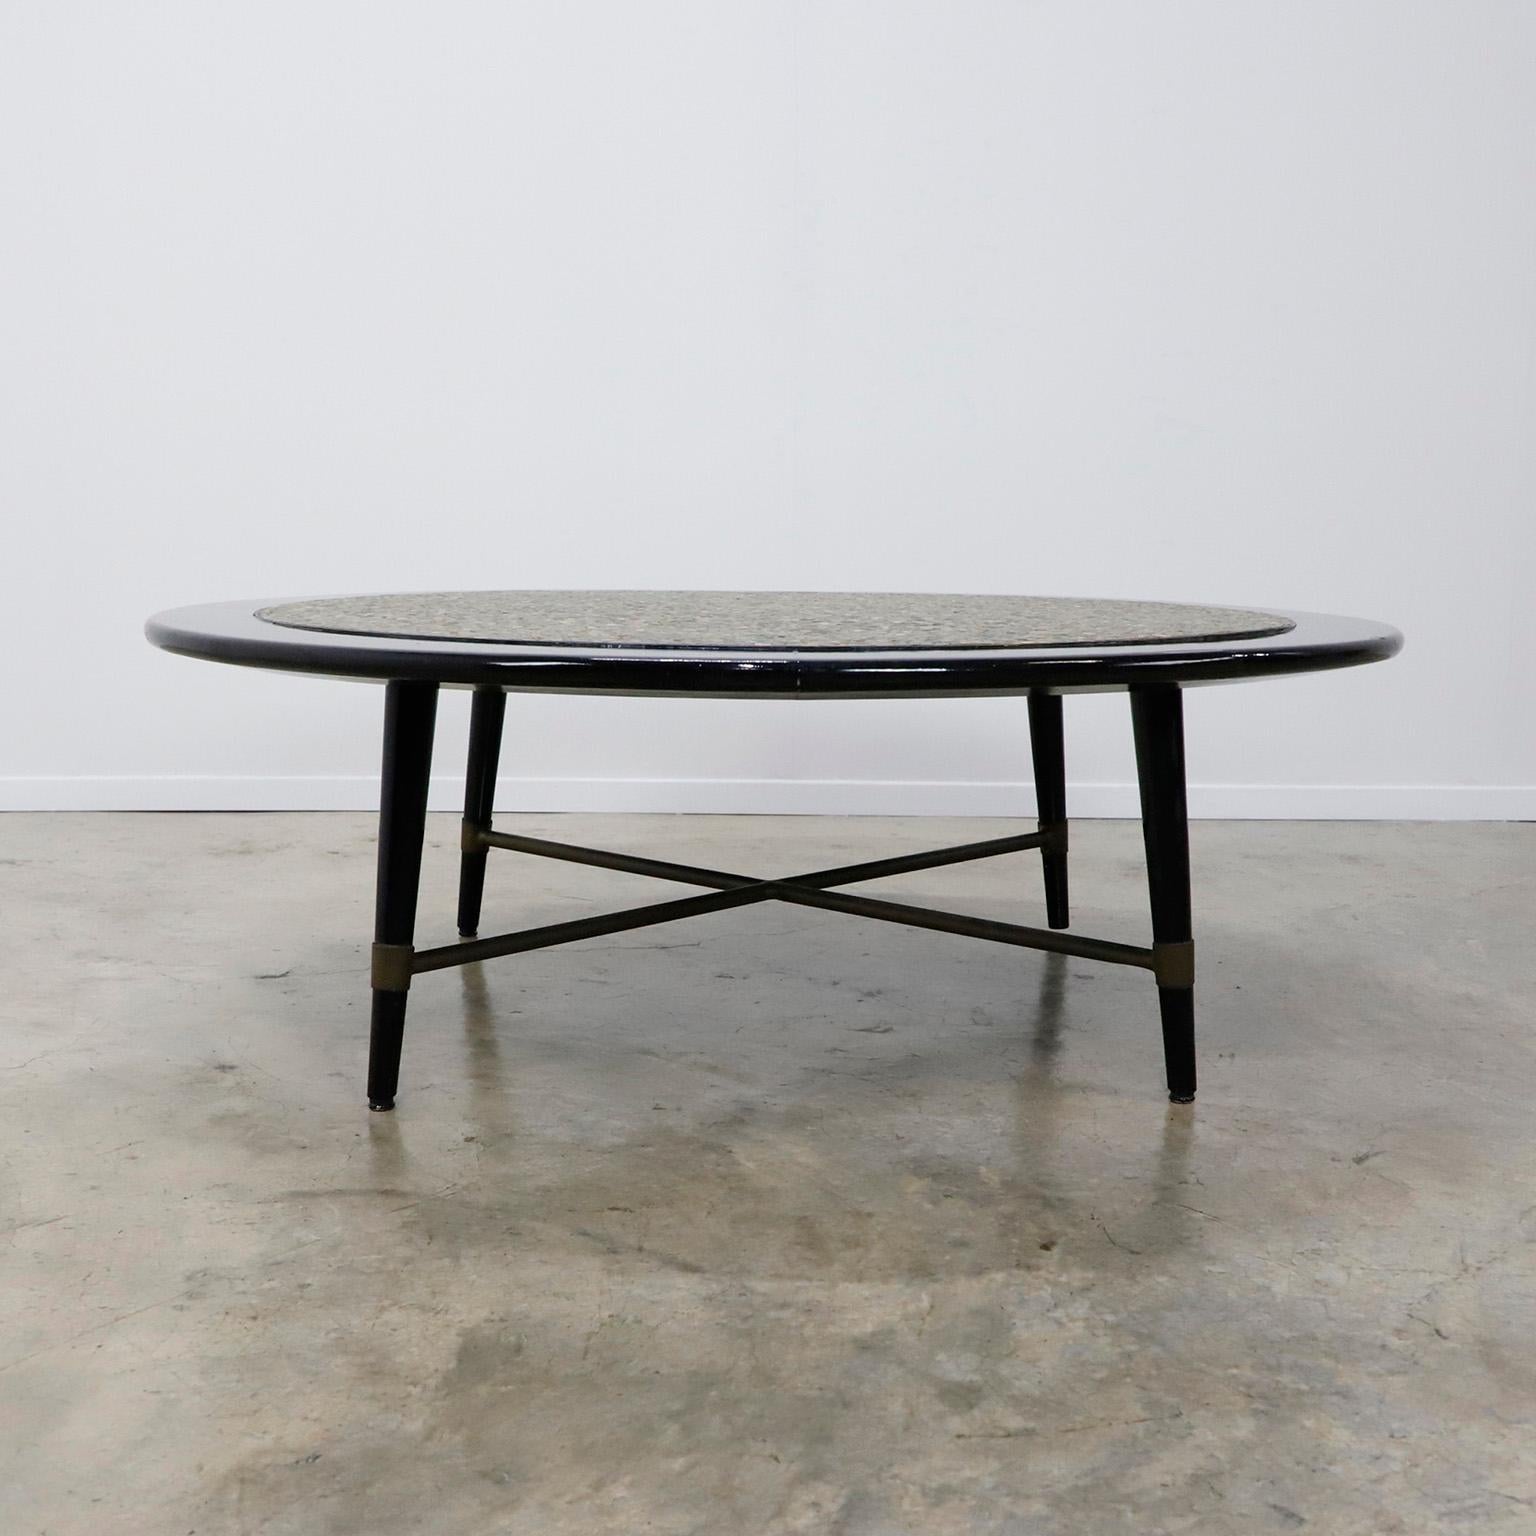 Circa 1960. If you are looking for an elegant table with extraordinary quality, we offer this beautiful table made with high-quality materials that includes a cover made entirely by hand with different precious stones creating a beautiful texture